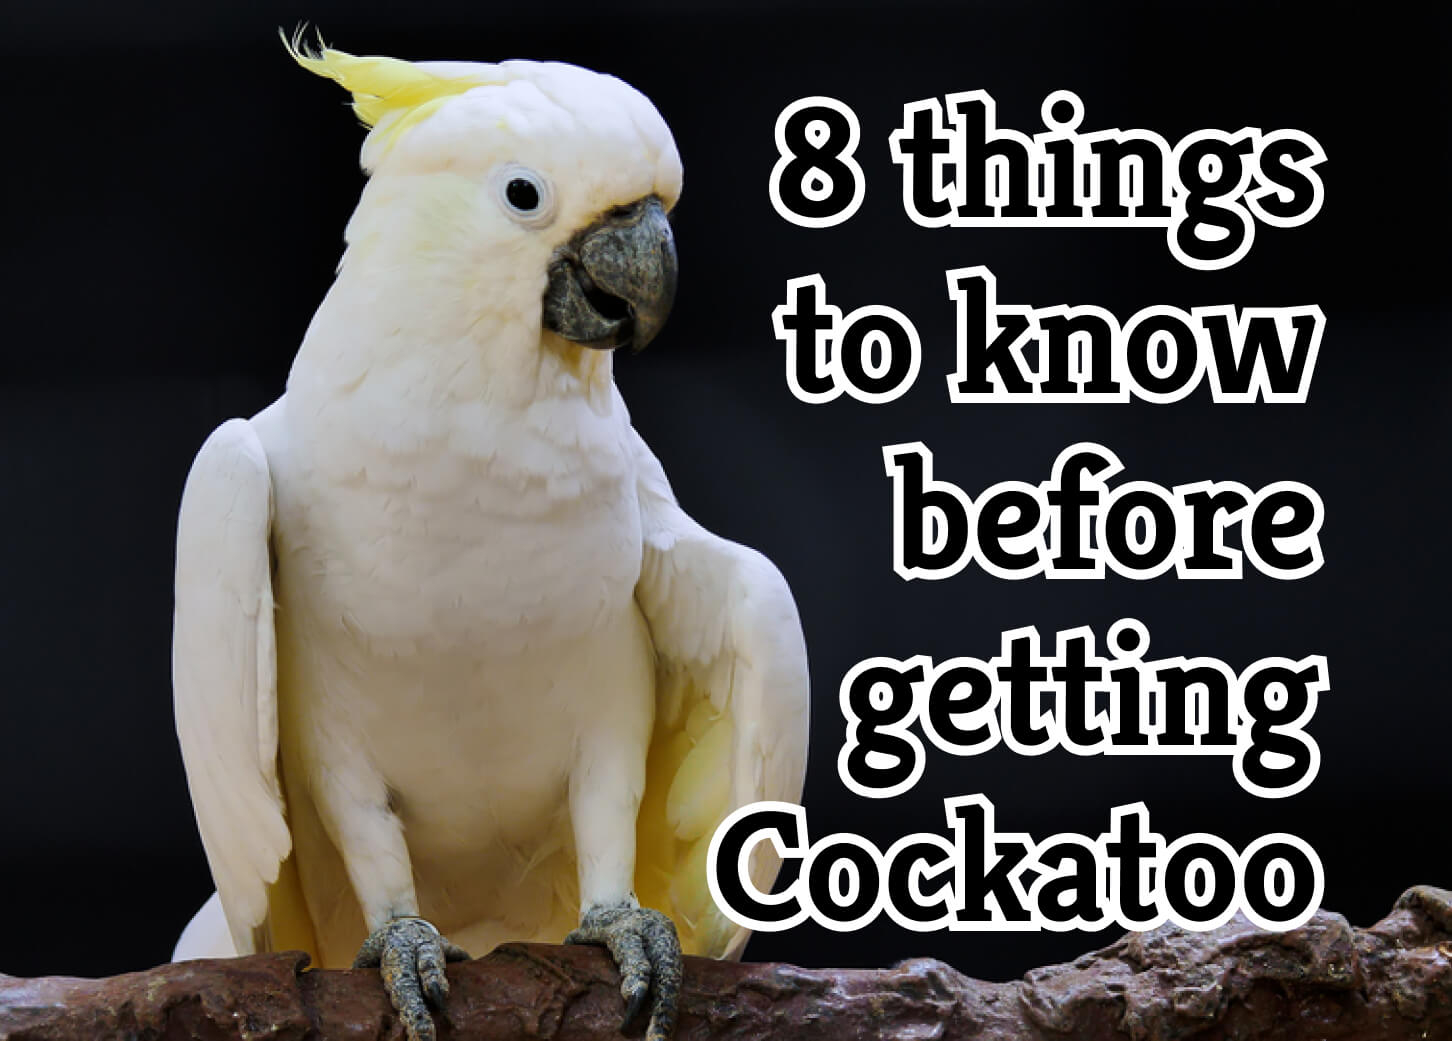 7 Things to Consider Before Getting Cockatoo